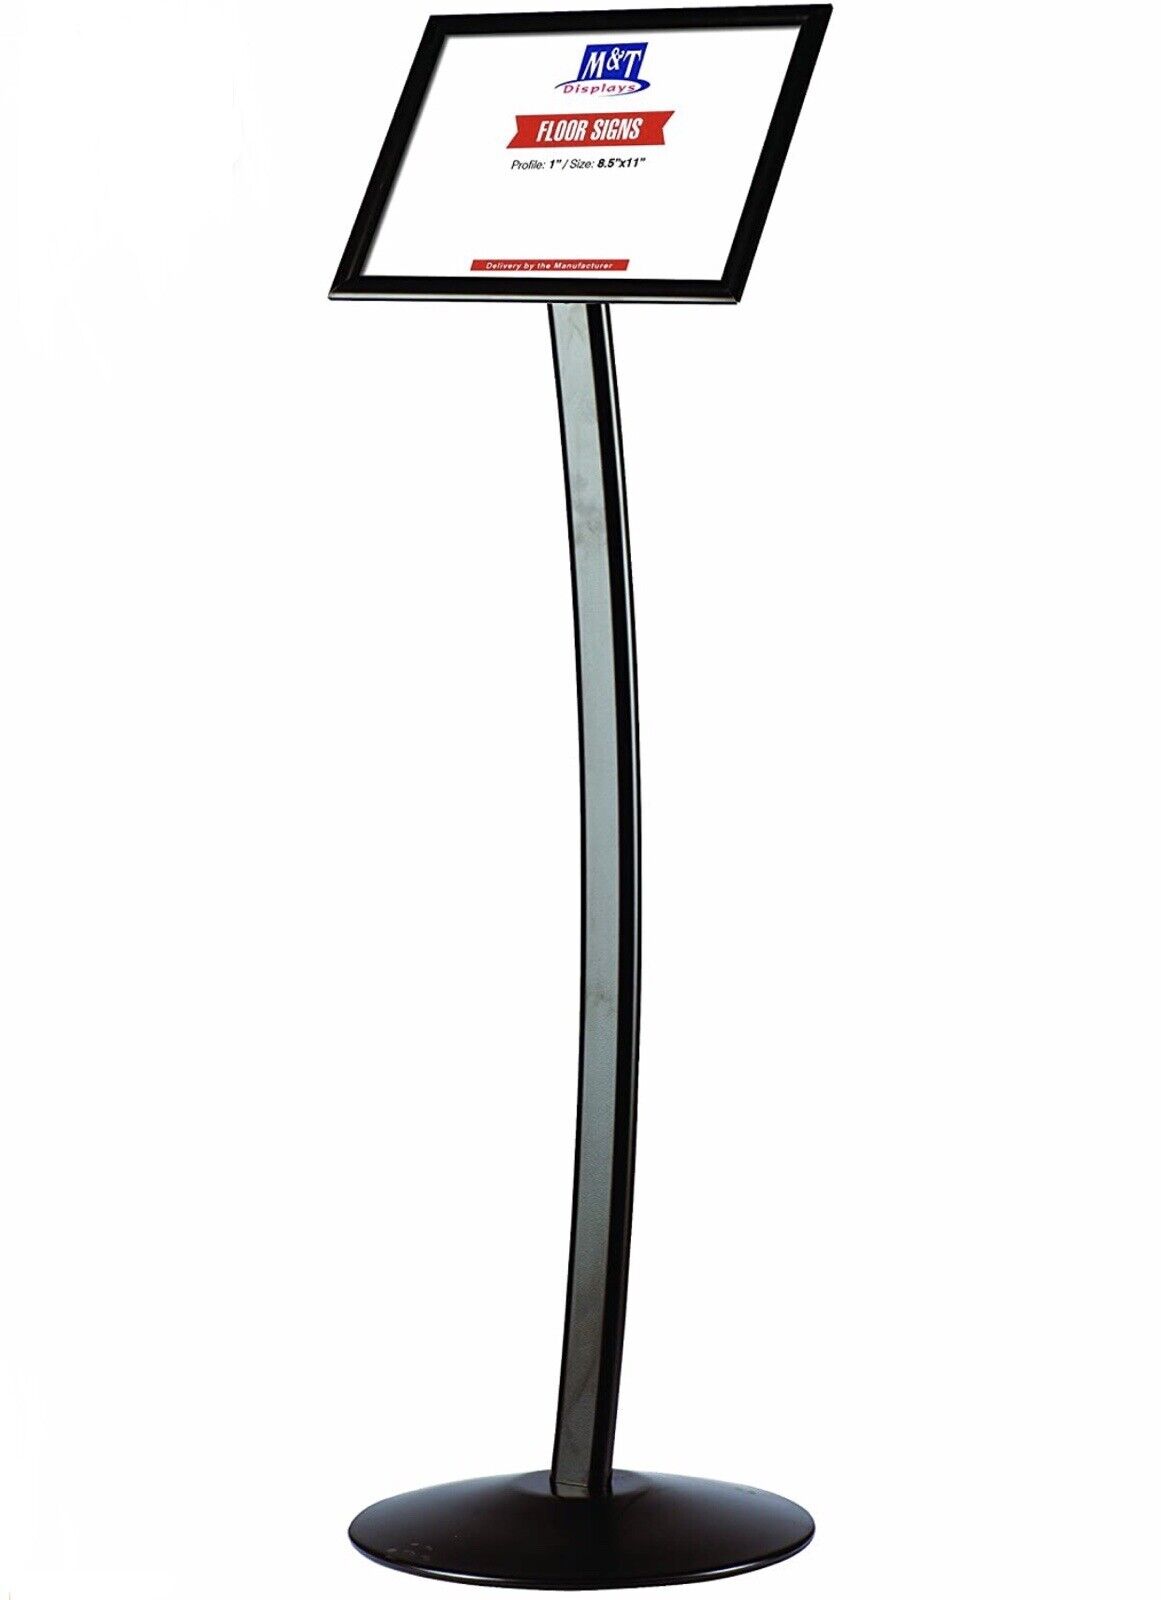 8.5x11” Curved Menu Advertising Sign Stand with Snap-Open Frame - Black Aluminum